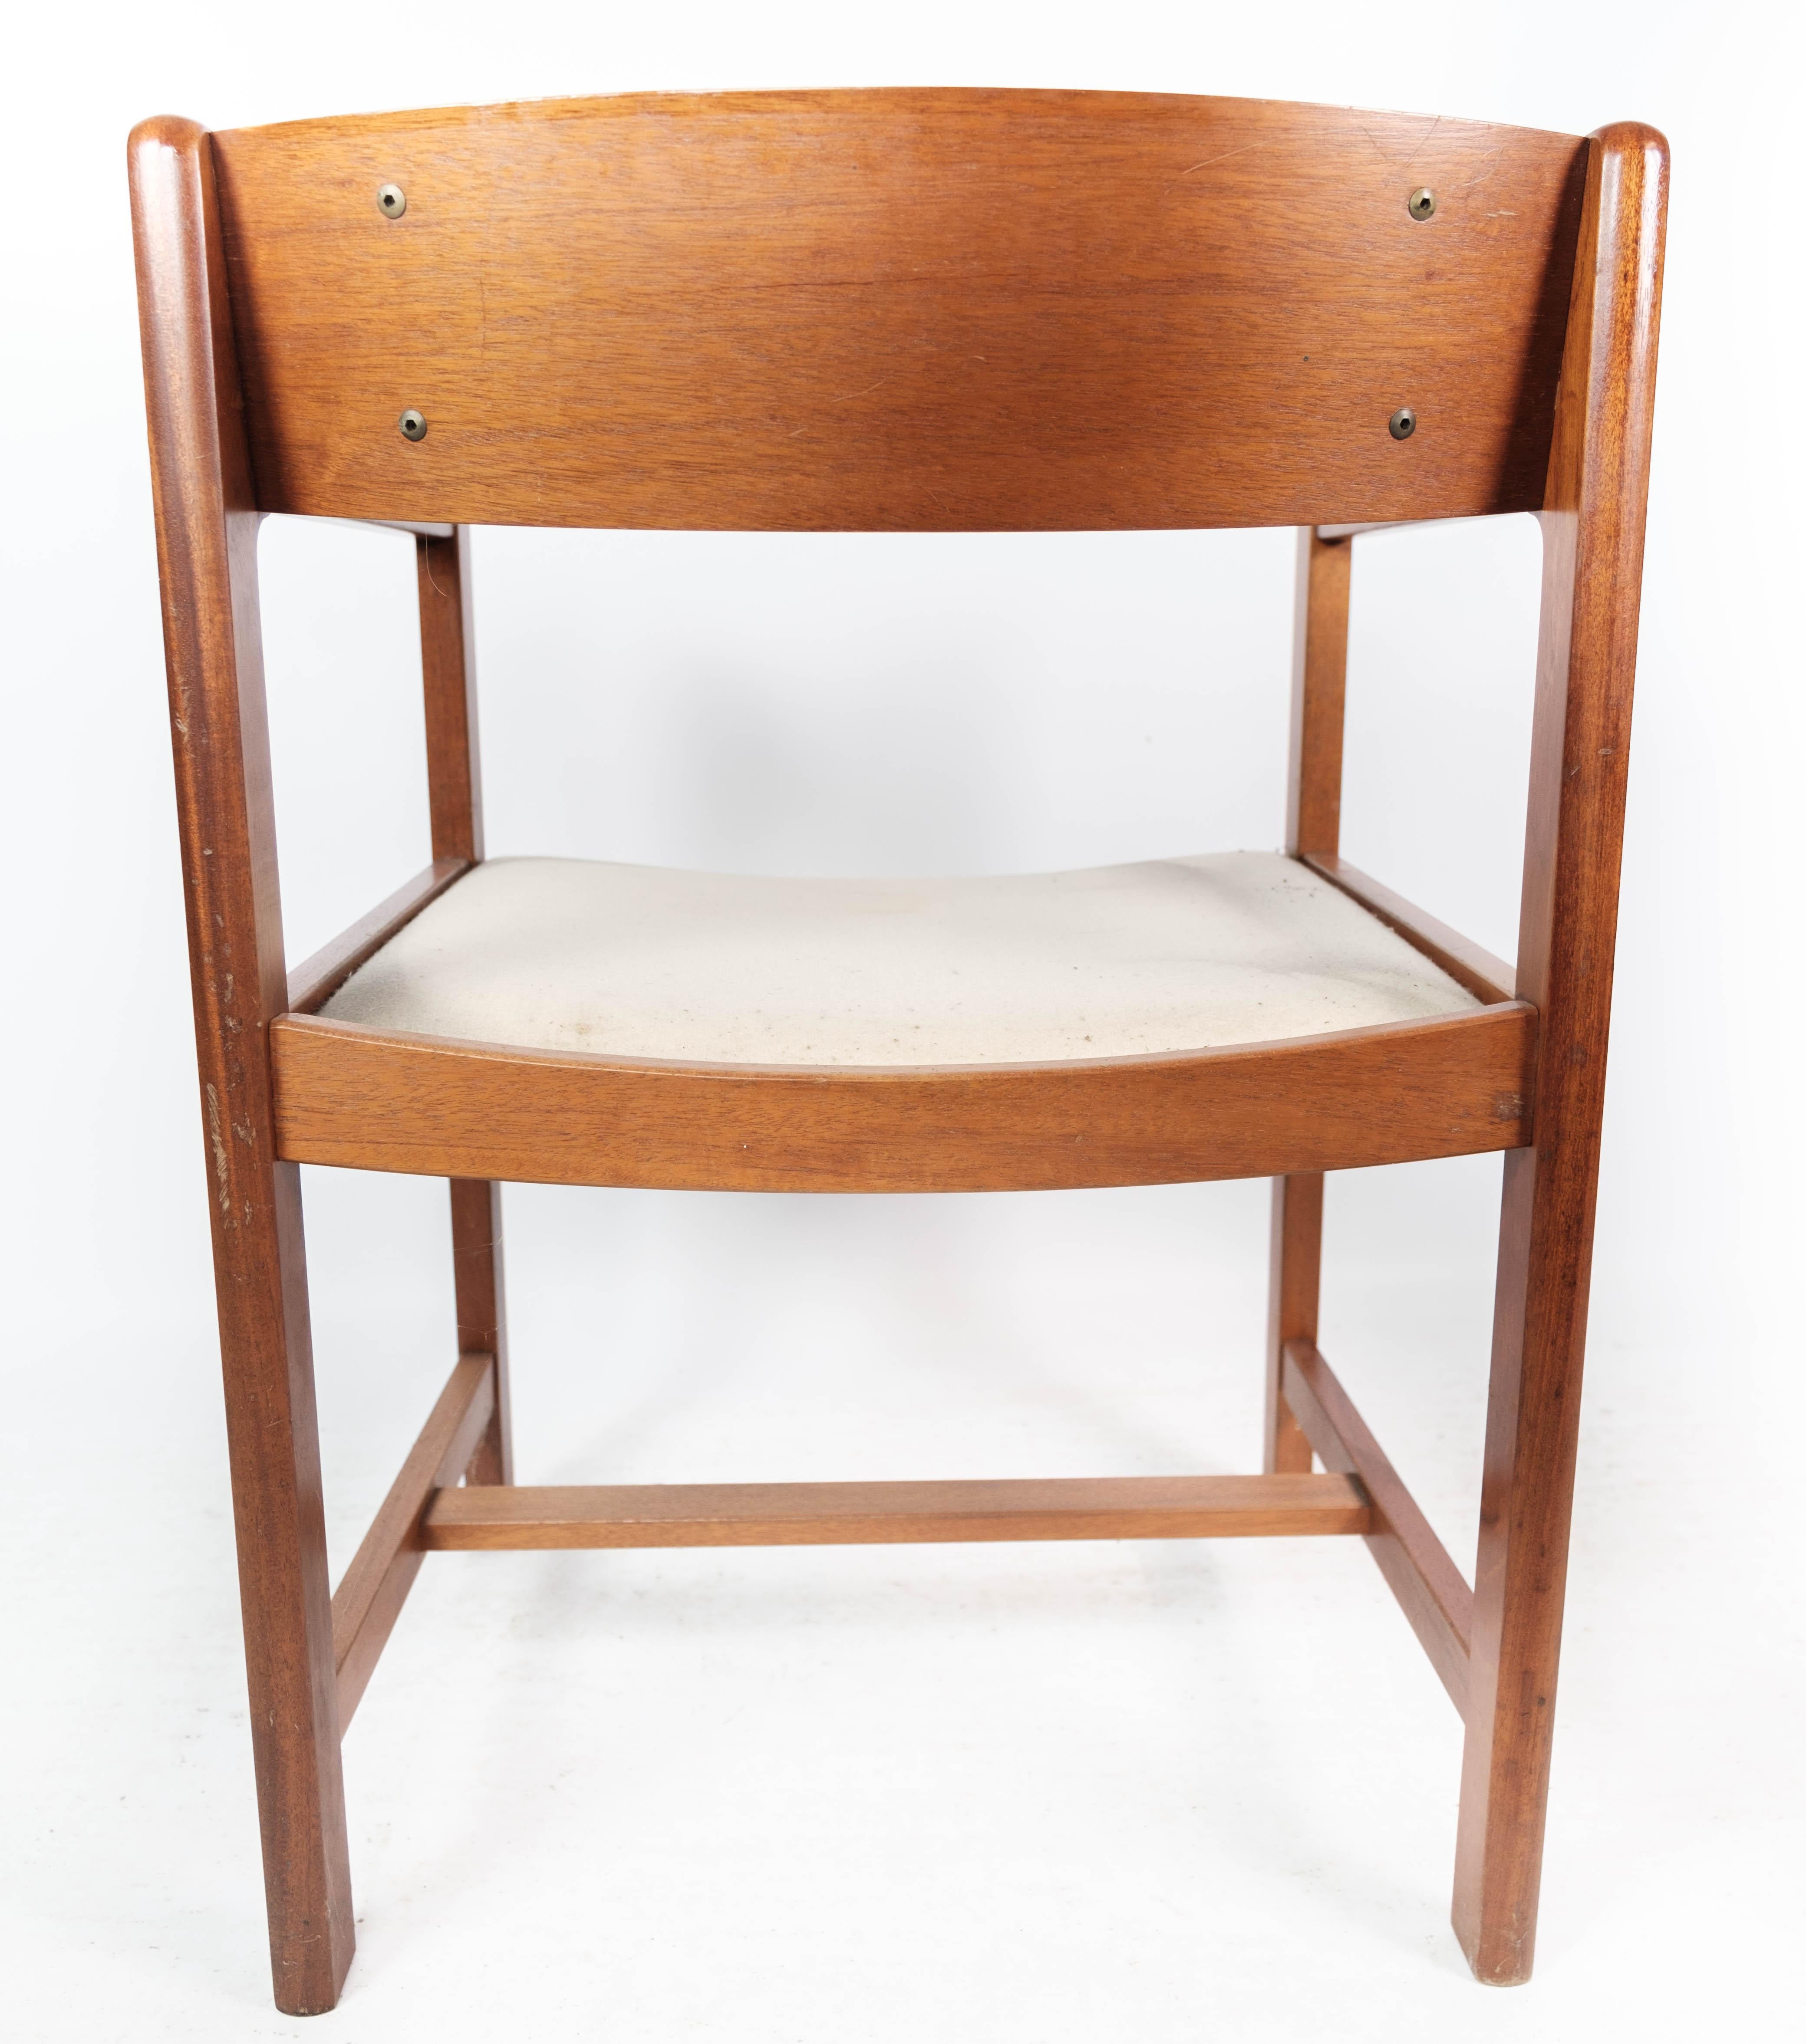 Mid-20th Century Armchair in Mahogany and Light Fabric of Danish Design by Søborg, 1960s For Sale